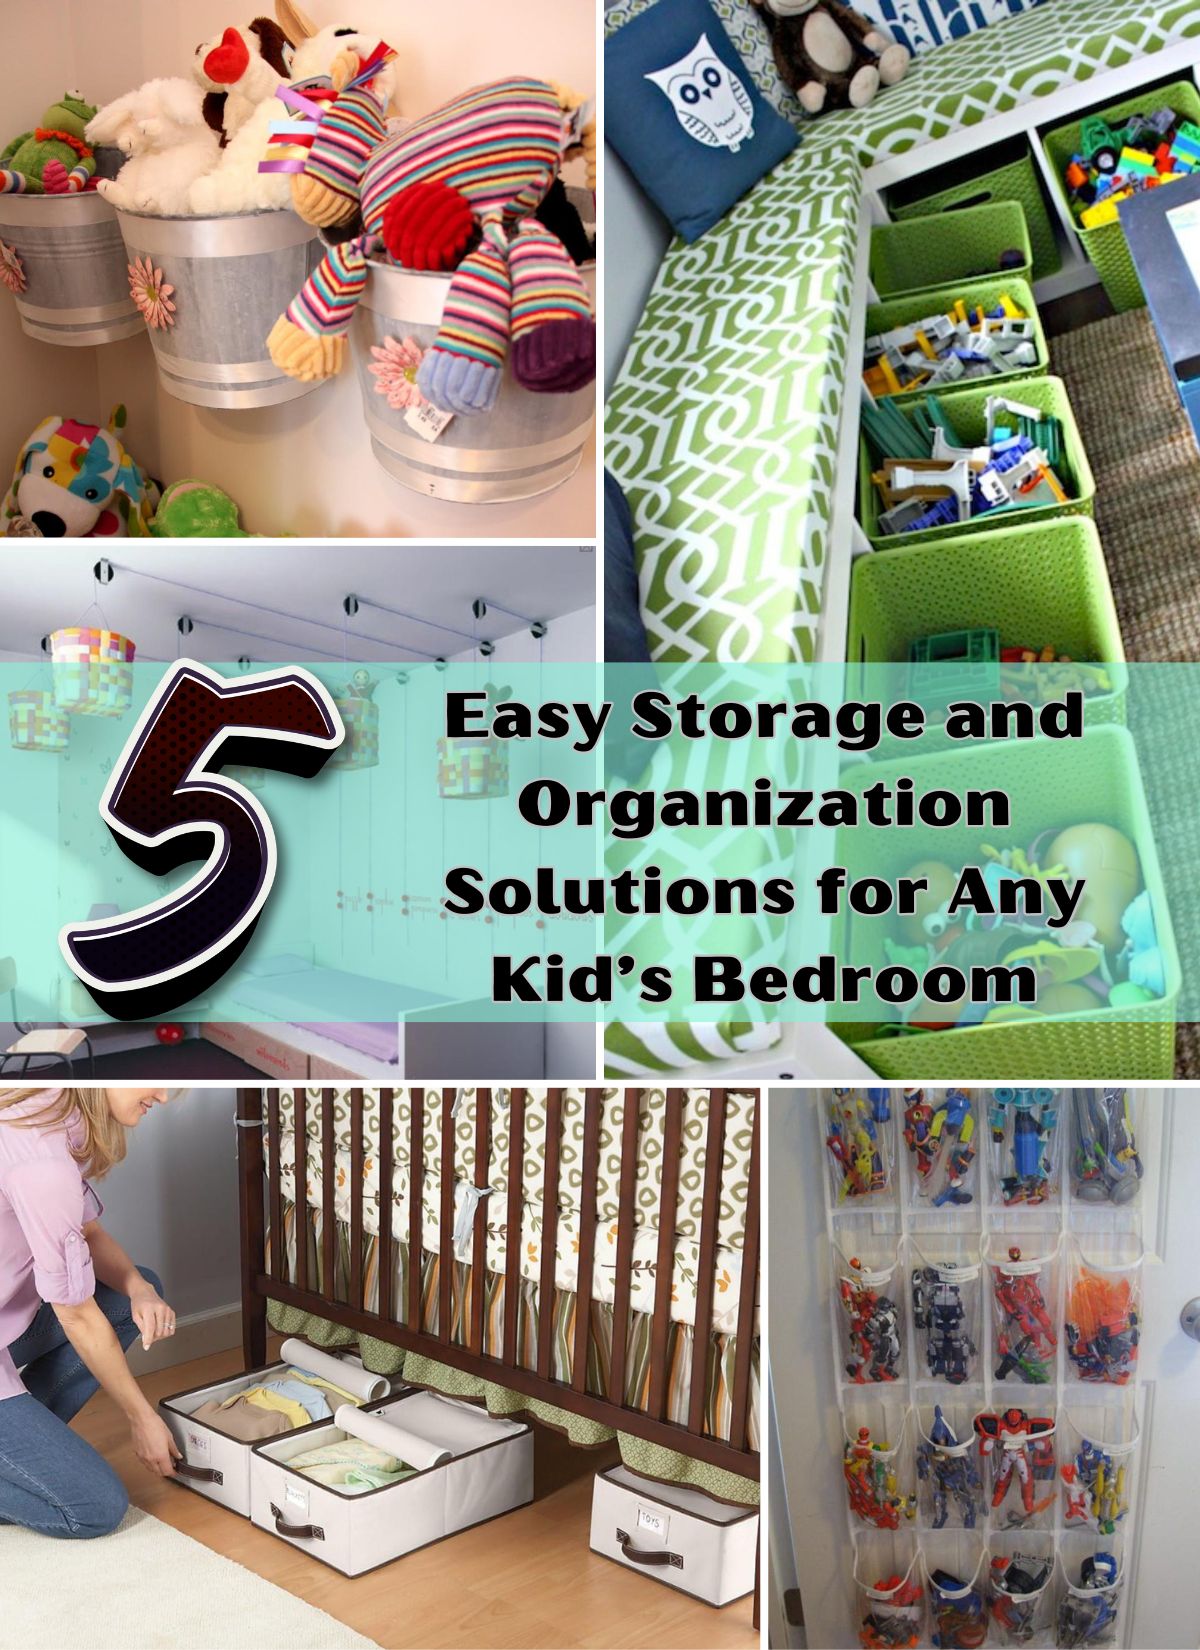 5 Easy Storage and Organization Solutions for Any Kid’s Bedroom collage.